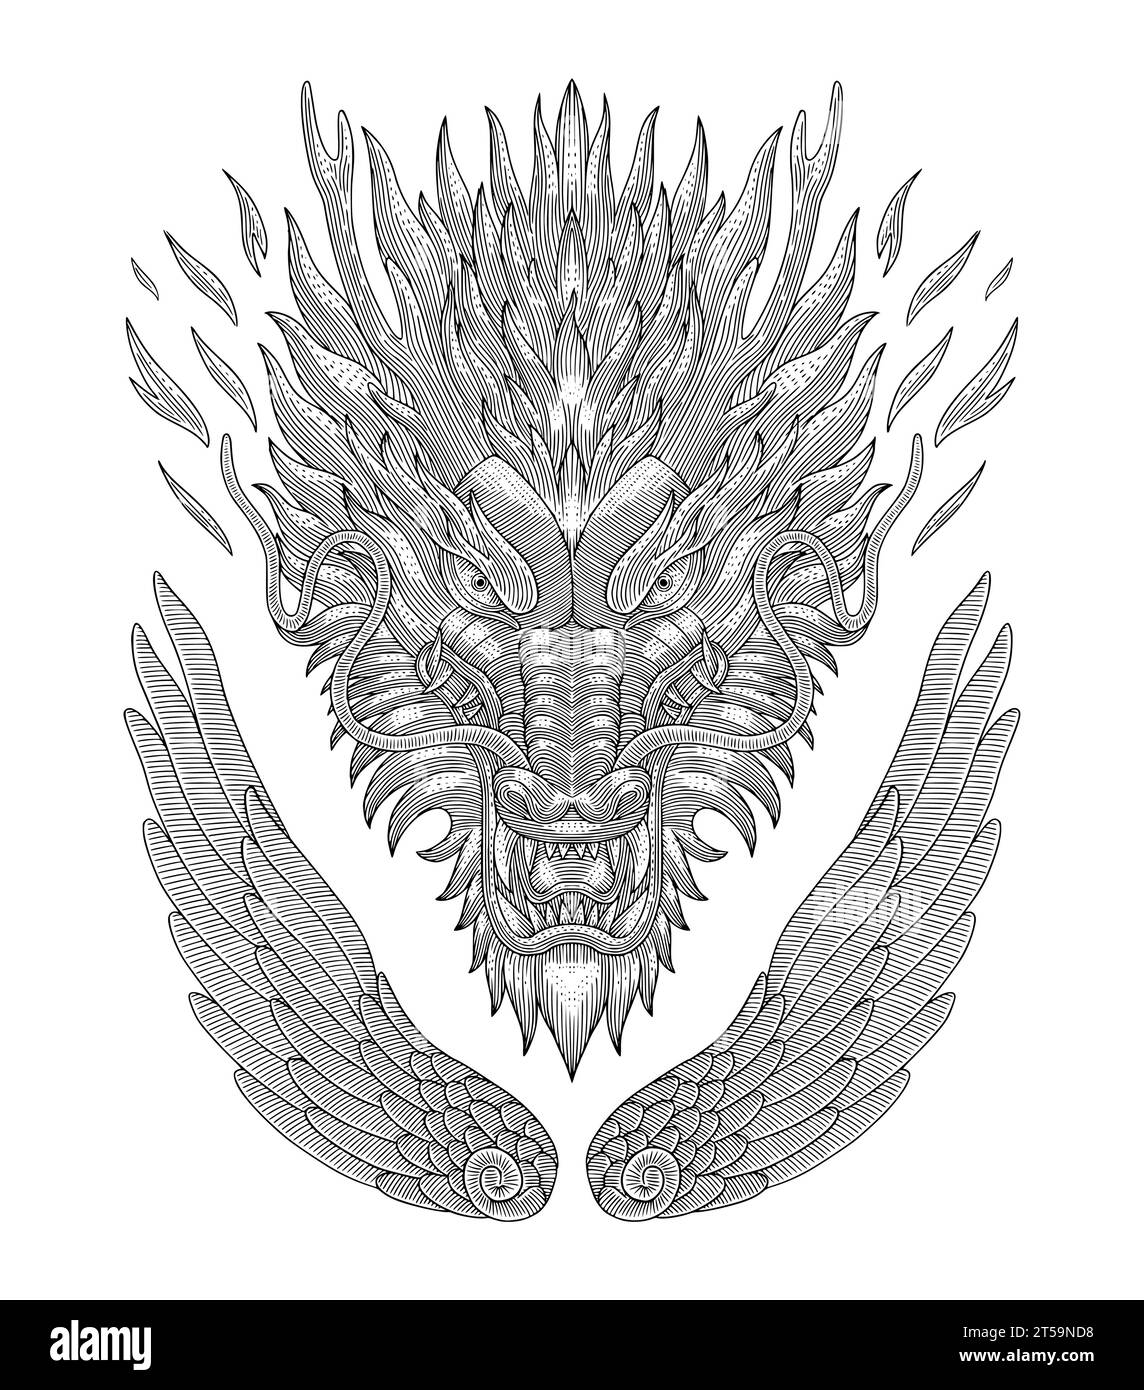 Angry dragon head with wings, vintage engraved drawing style illustration Stock Vector